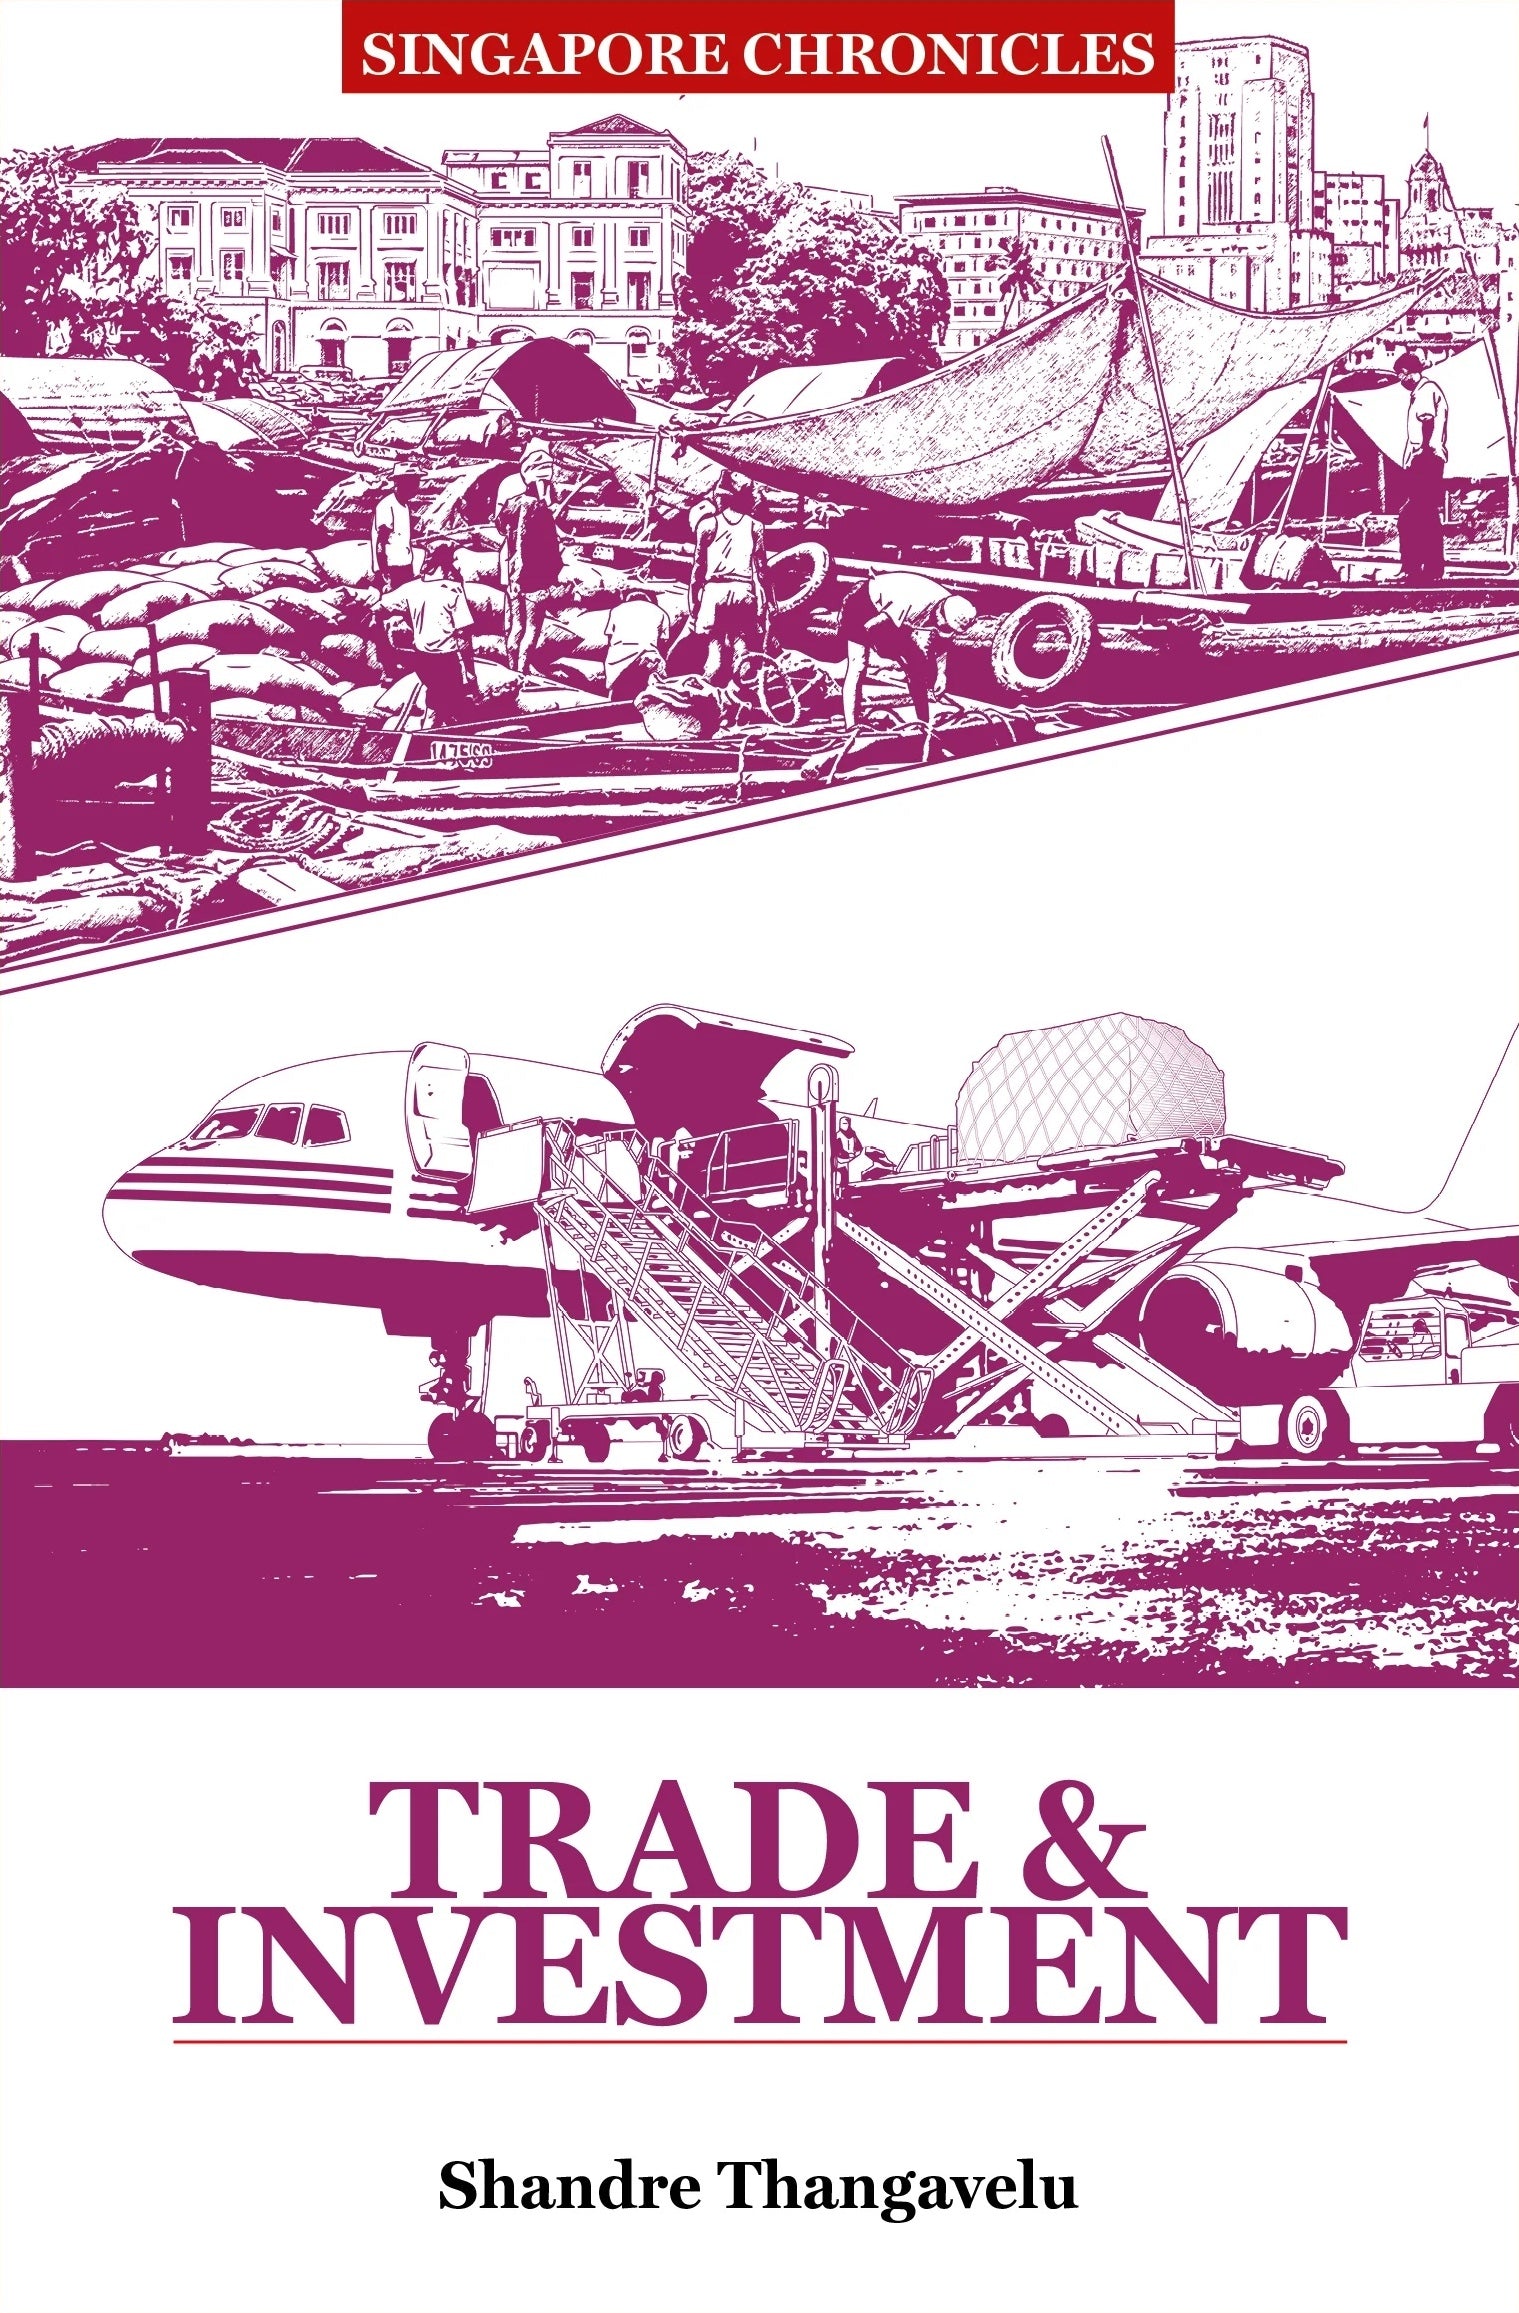 Singapore Chronicles: Trade & Investment